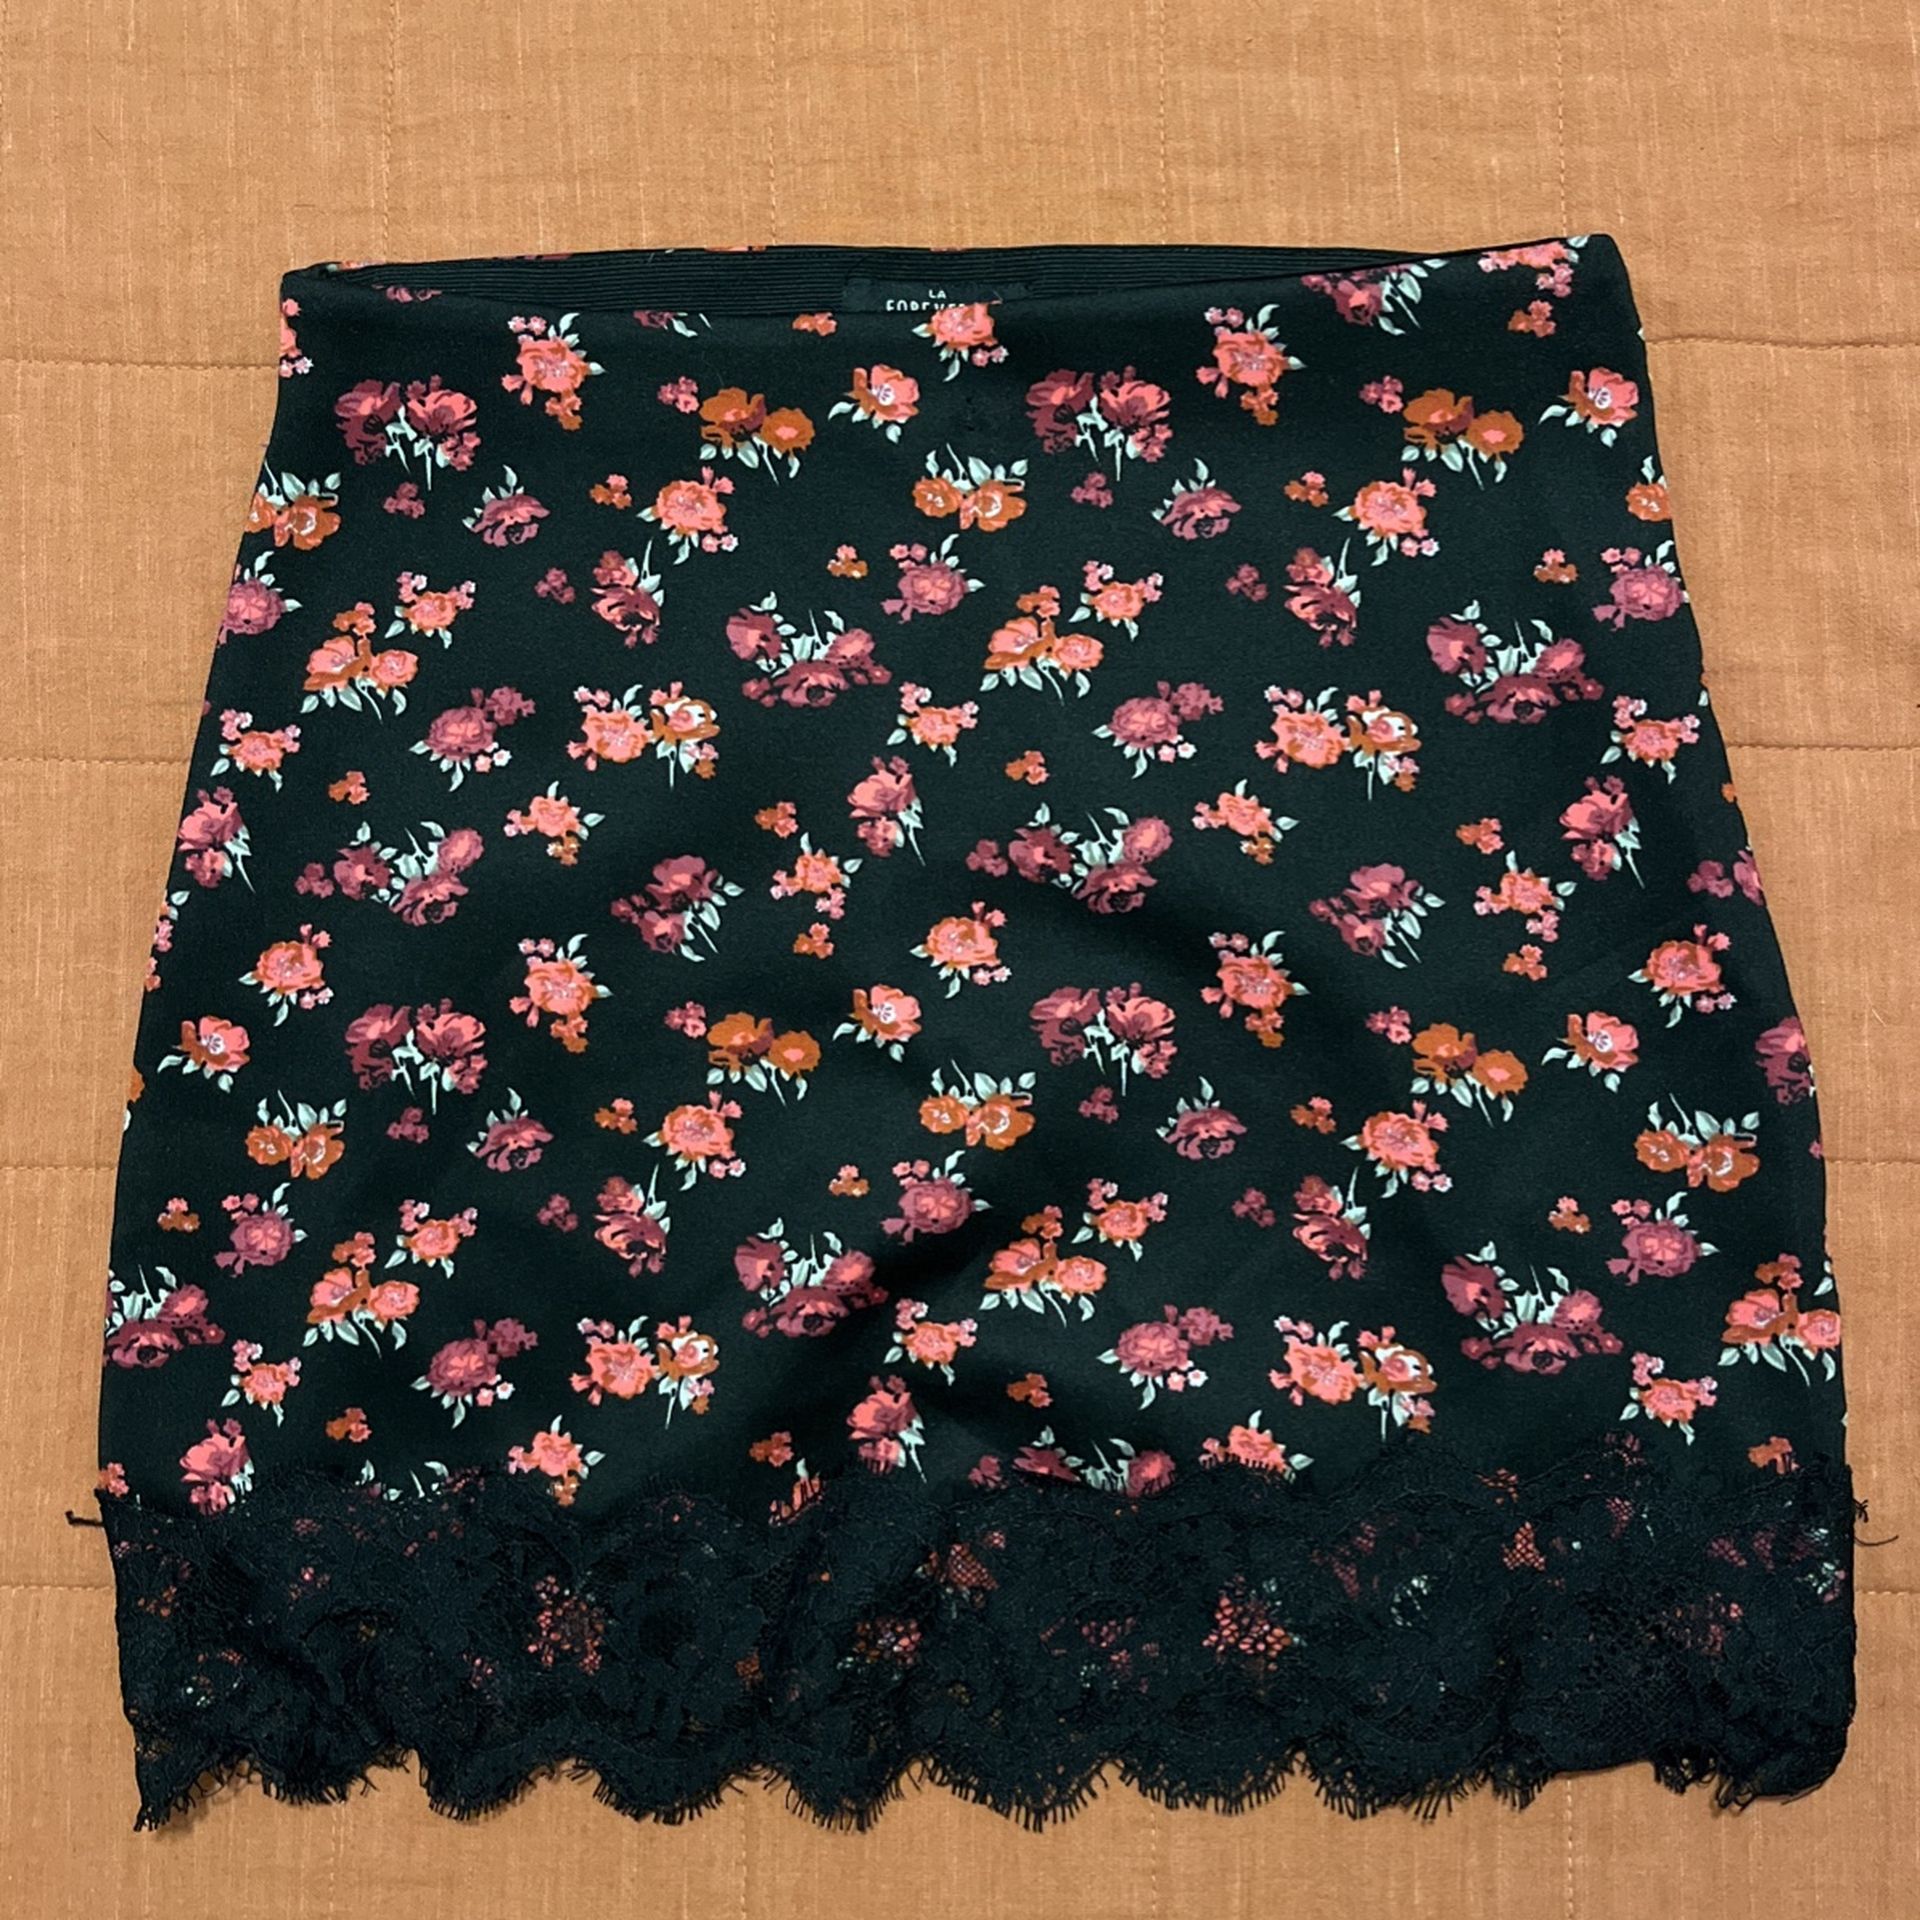 Floral And Lace Mini Skirt 